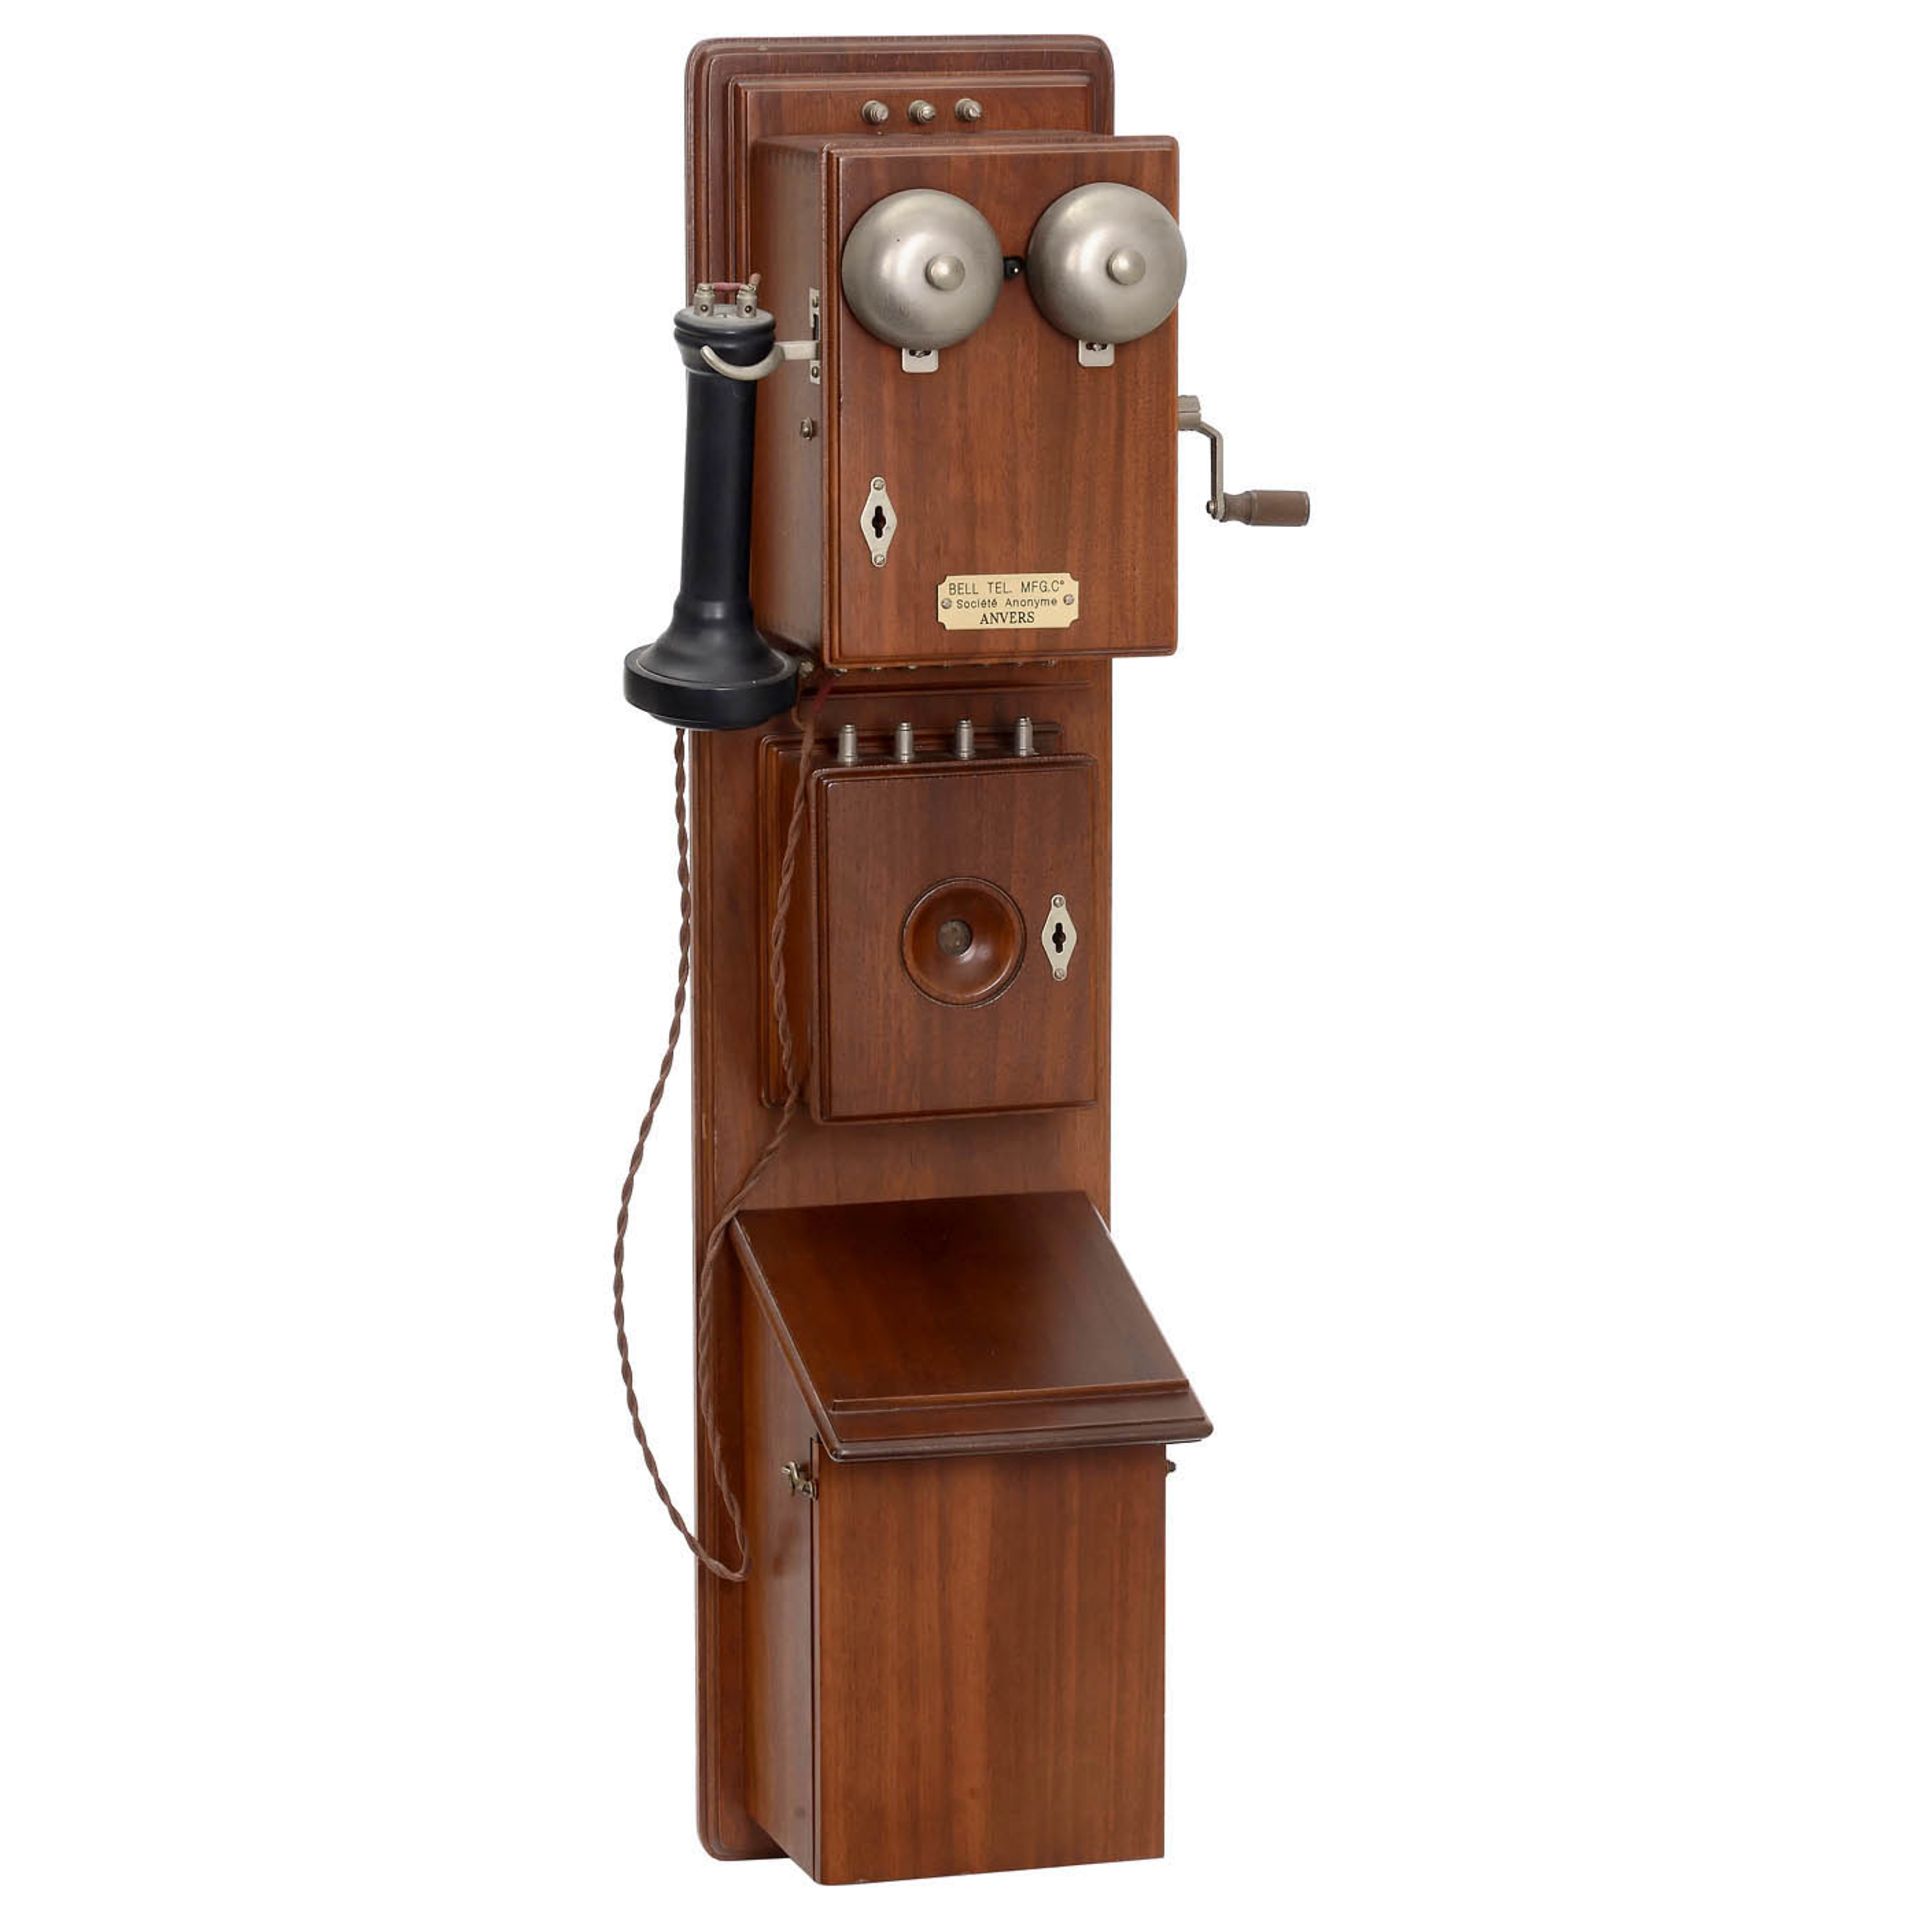 Limited Edition "100 Years Bell Telephone", 1982